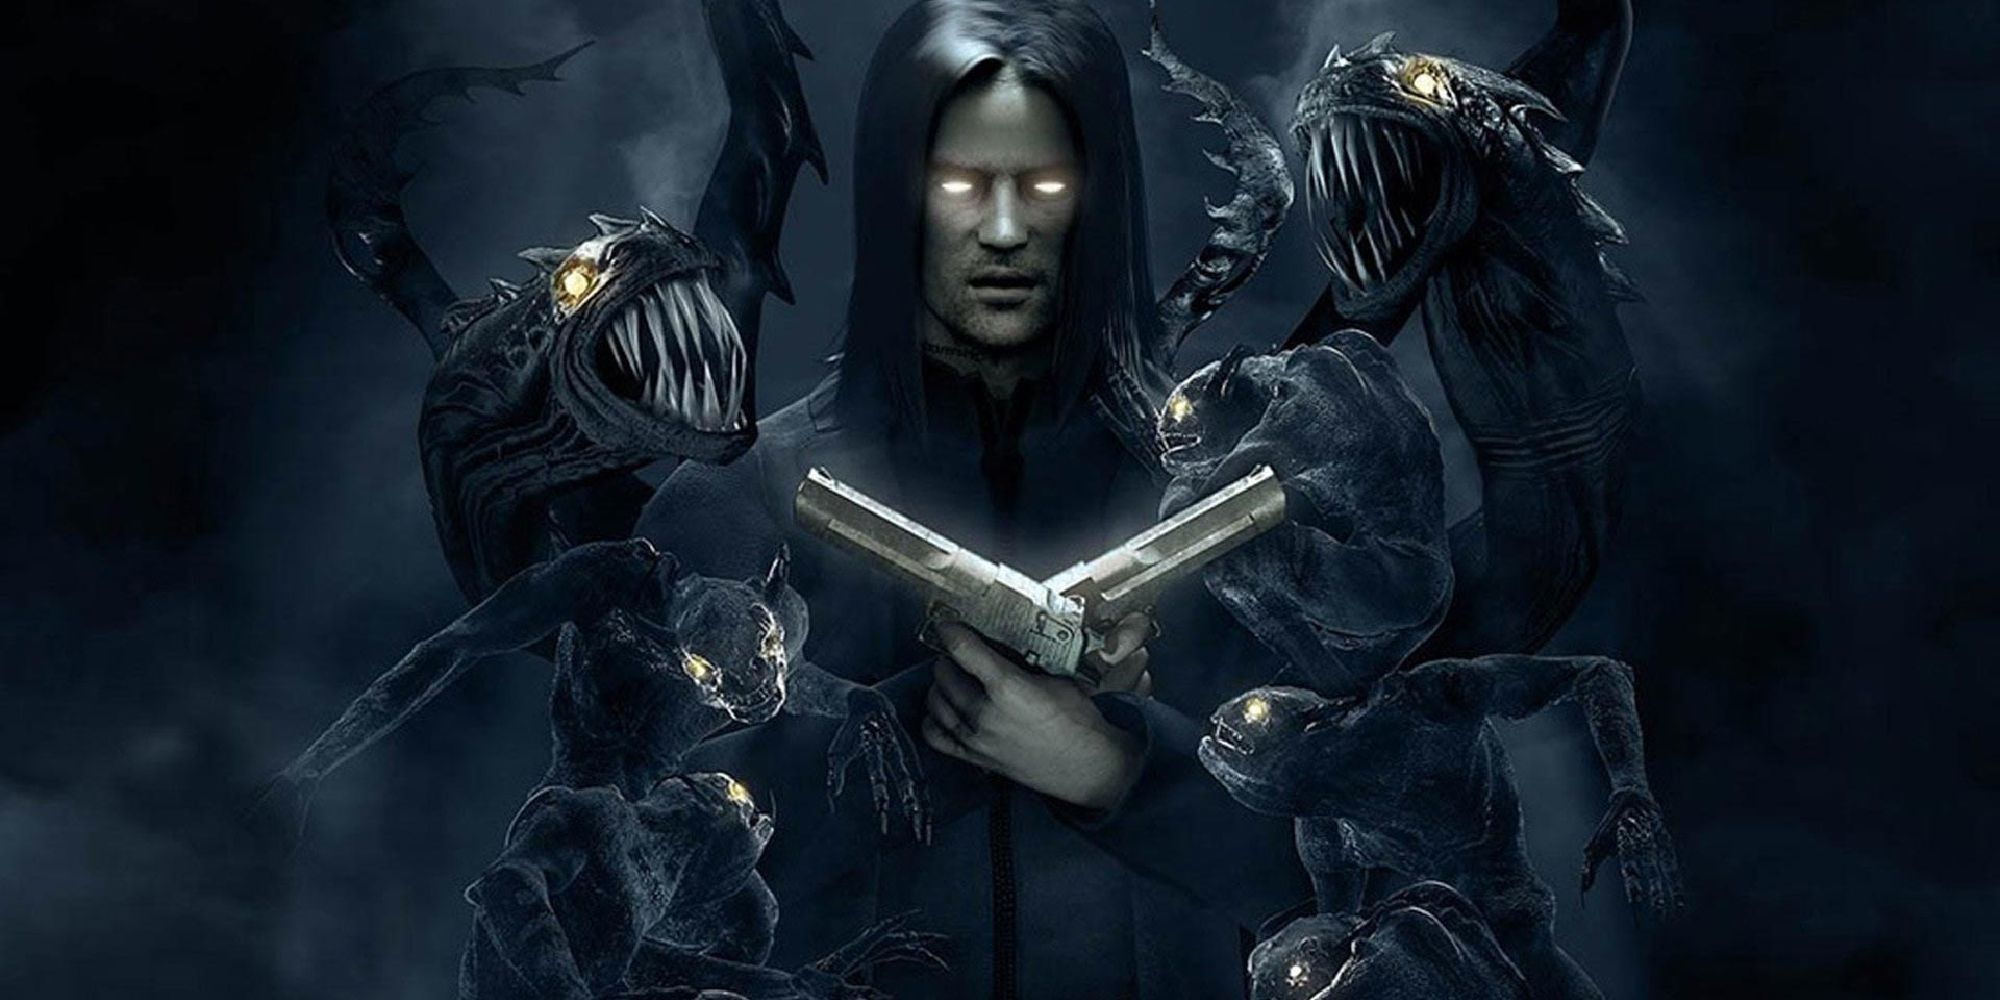 Key art from Starbreeze Studios' The Darkness, showing Jackie Estacado posing with his arms crossed and The Darkness looming behind him